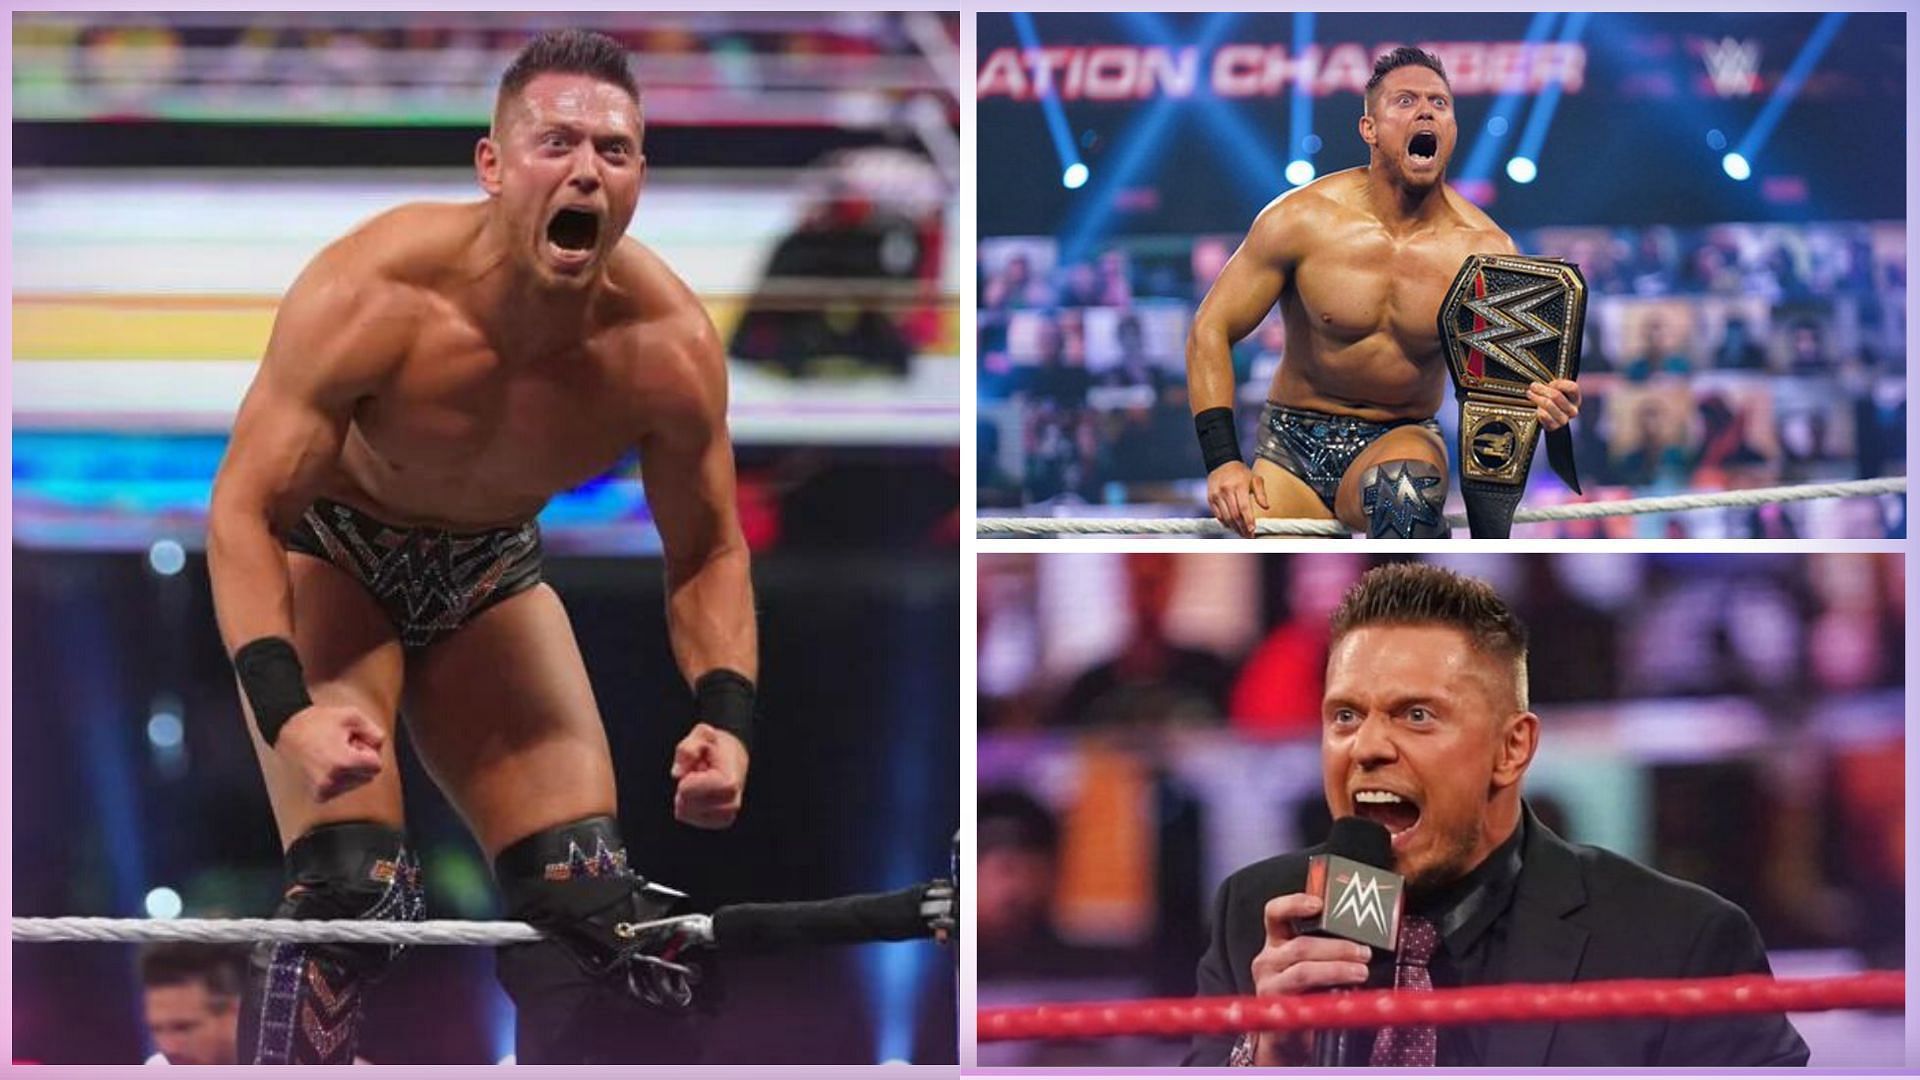 The Miz will be a part of high stakes match on WWE RAW.